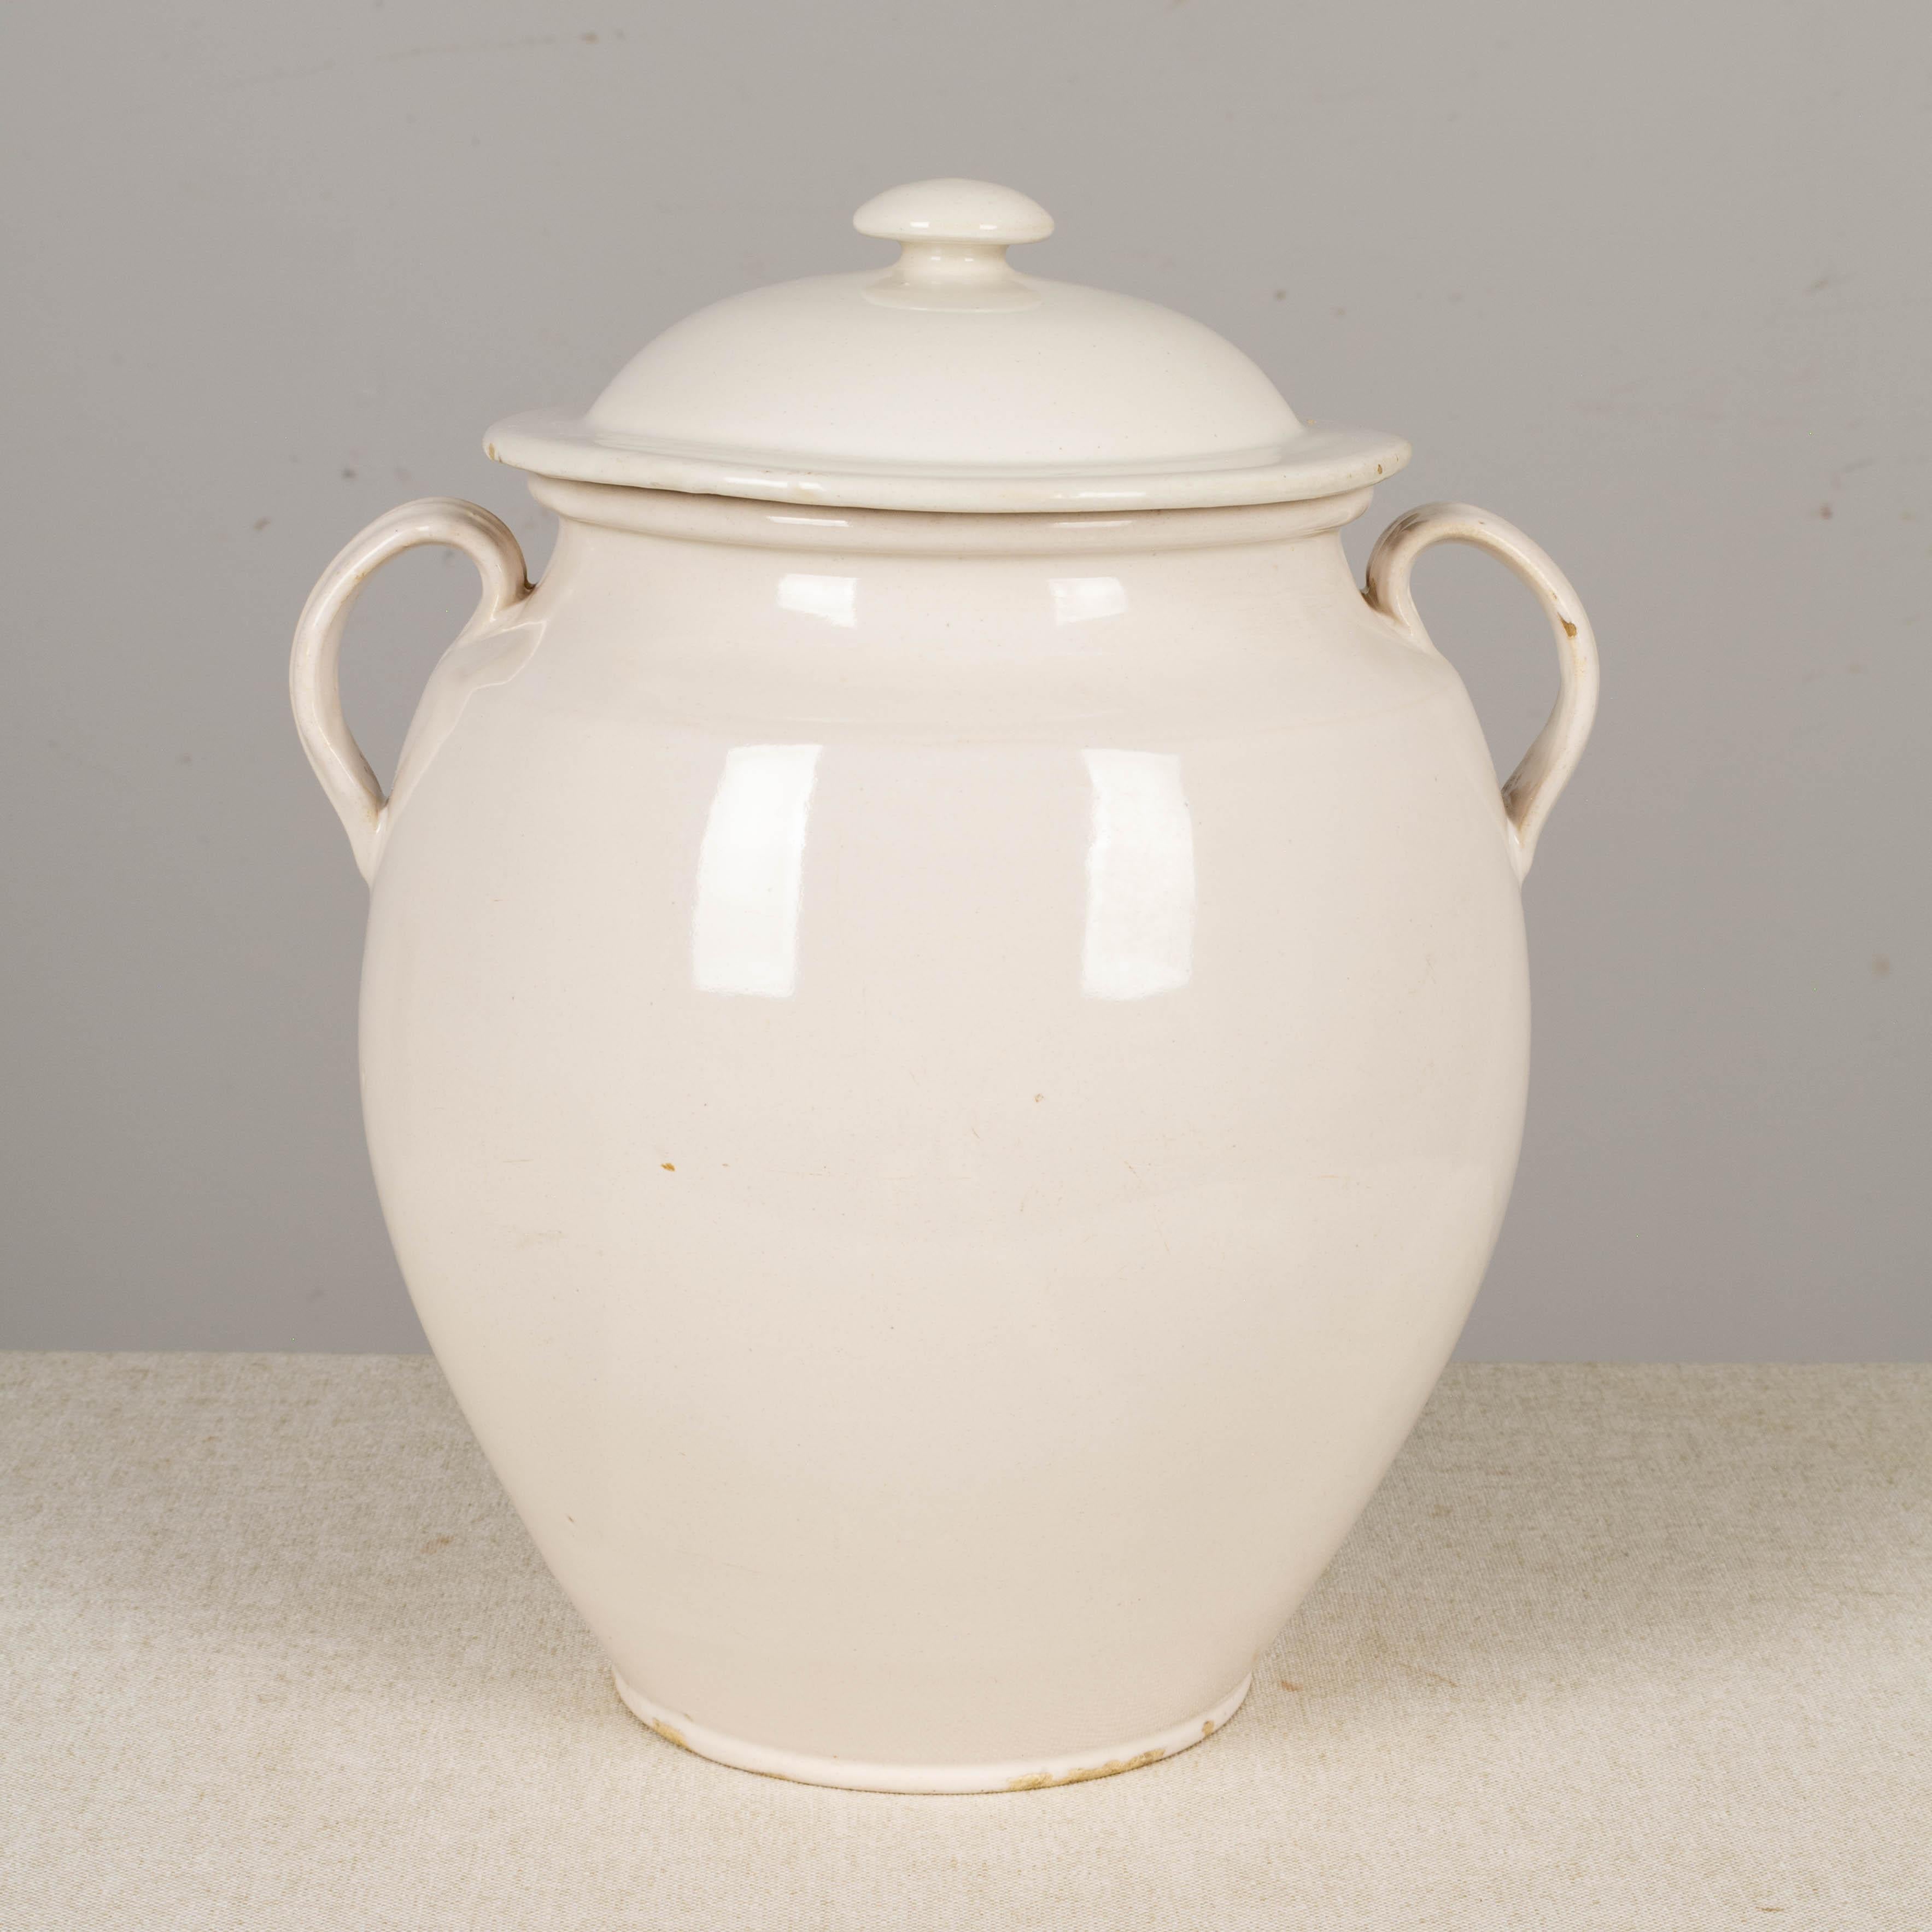 A 19th century French earthenware lidded confit pot with rare white terre de fer, or ironstone glaze from Martres-Tolosone, a small village in Southwest France. In very good condition with only a minor chip to the underside of the lid. This ordinary